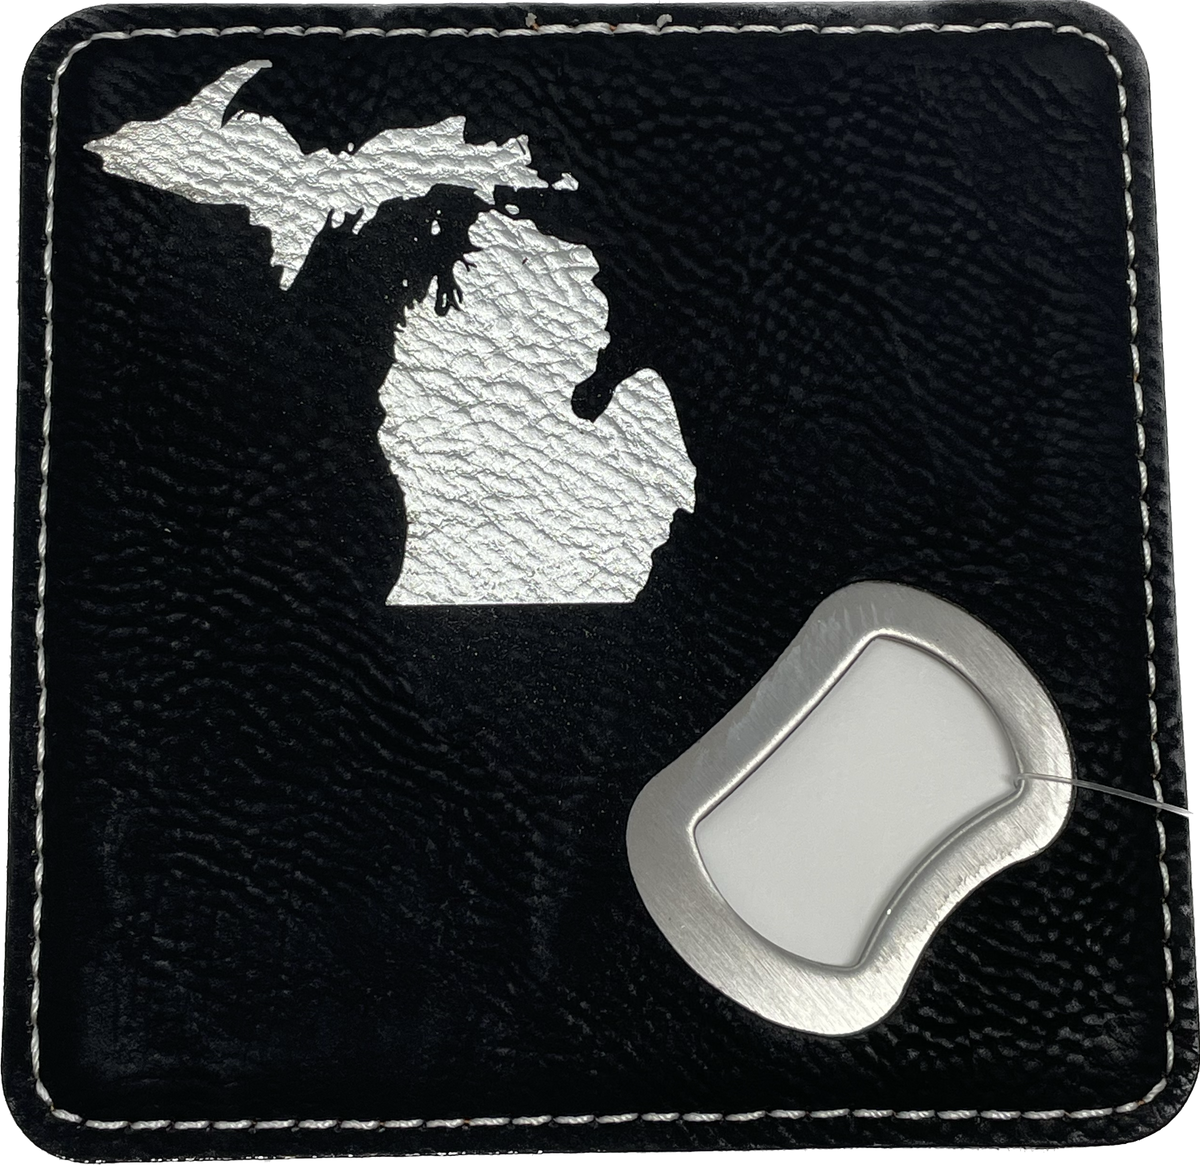 State of Michigan Leather Coaster/Bottle Opener